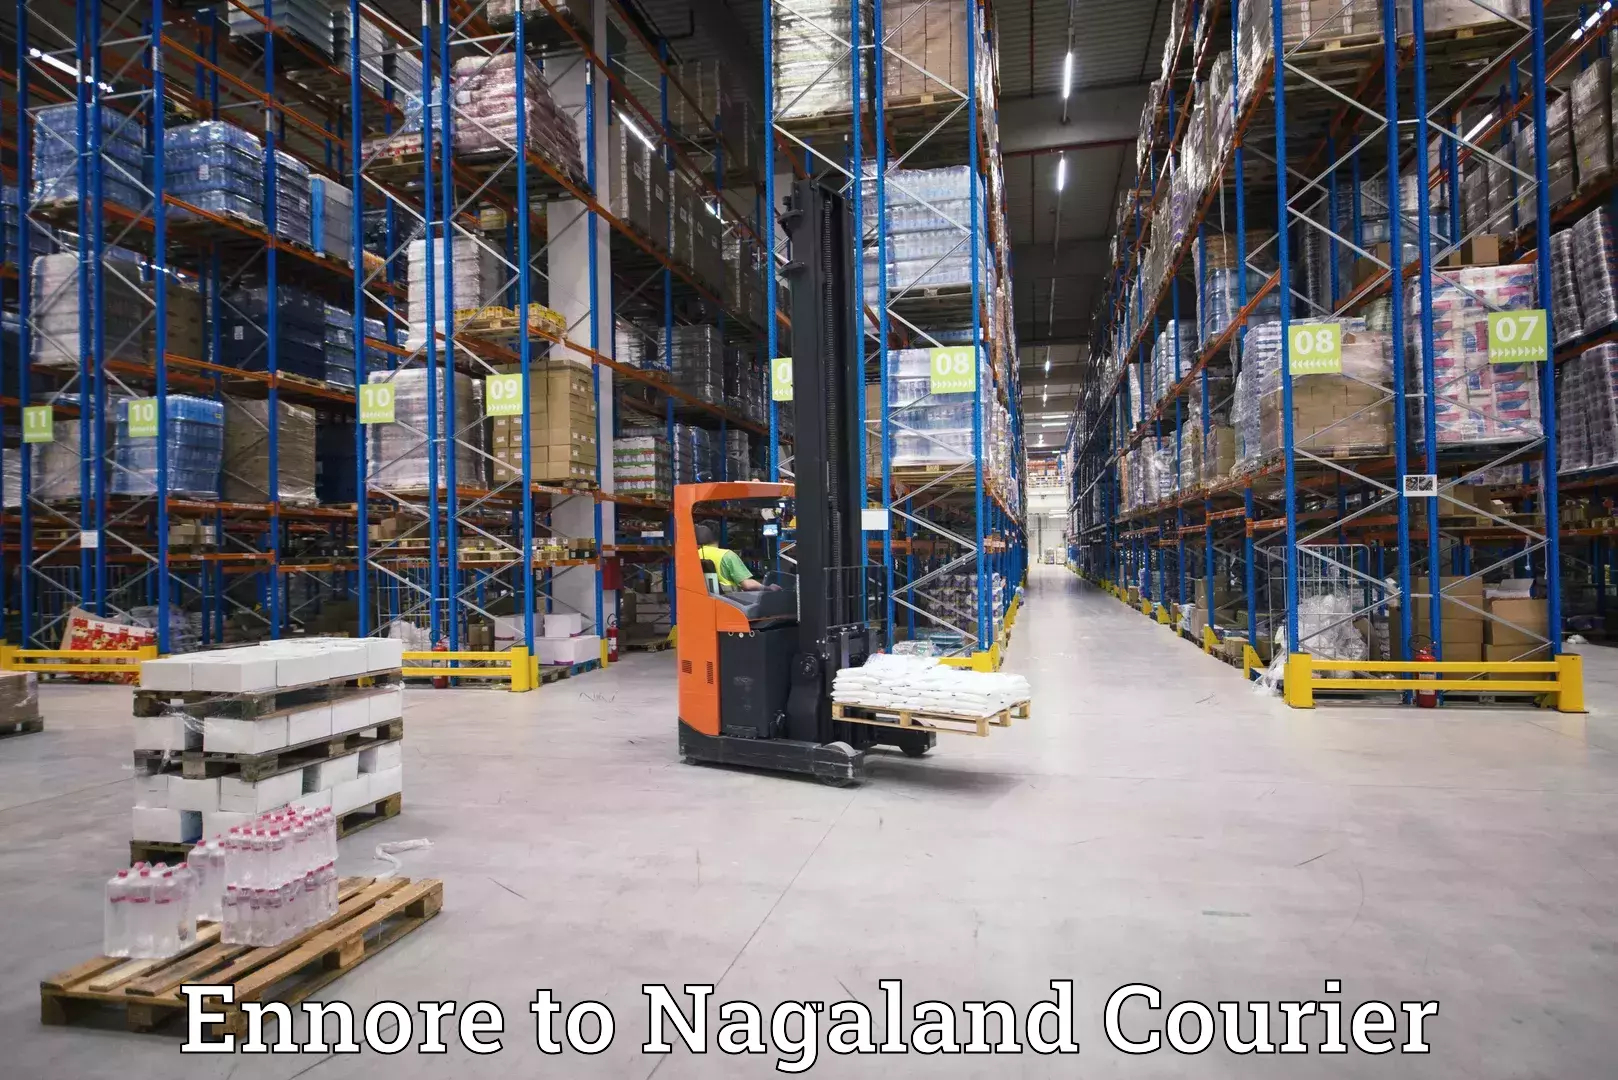 Nationwide courier service Ennore to Nagaland